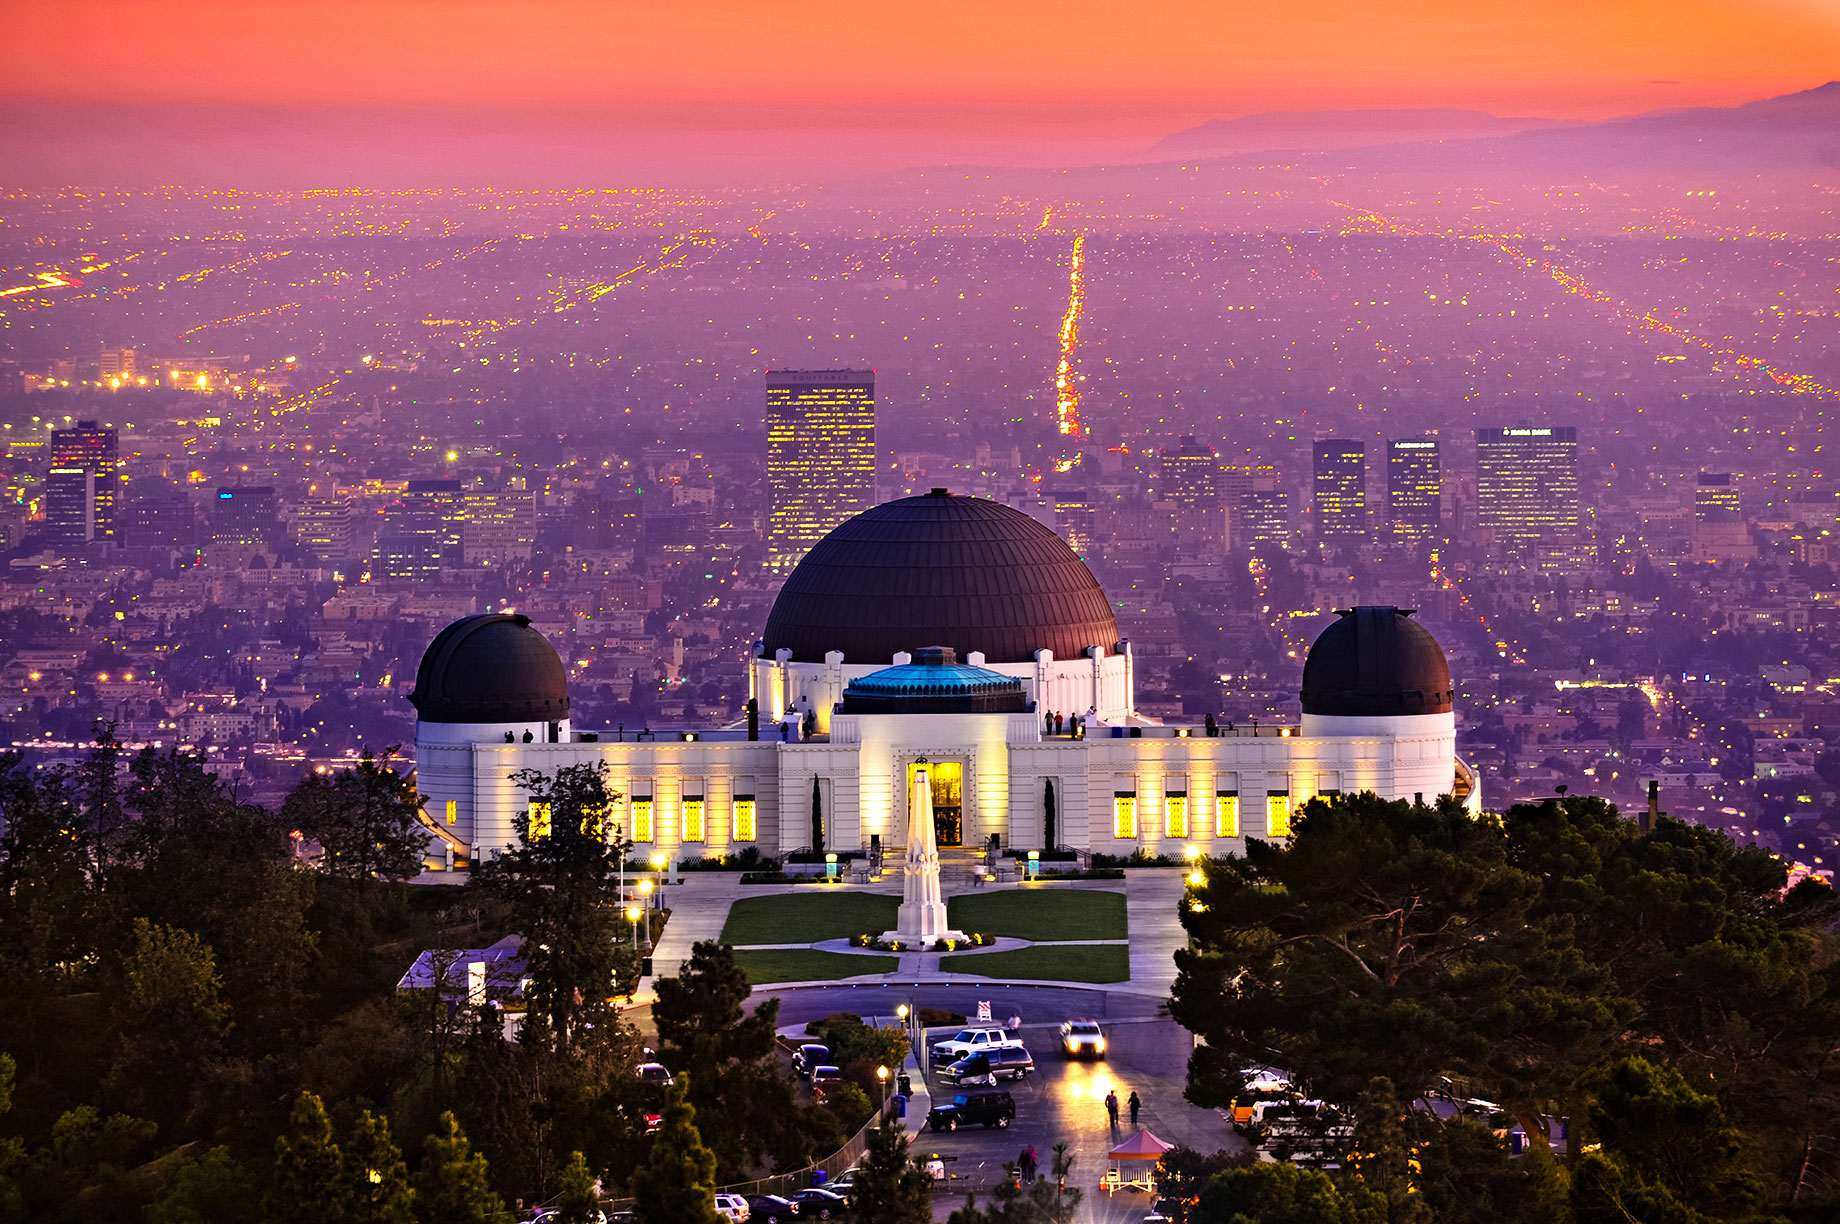 Griffith Park Observatory - Los Angeles, California, USA